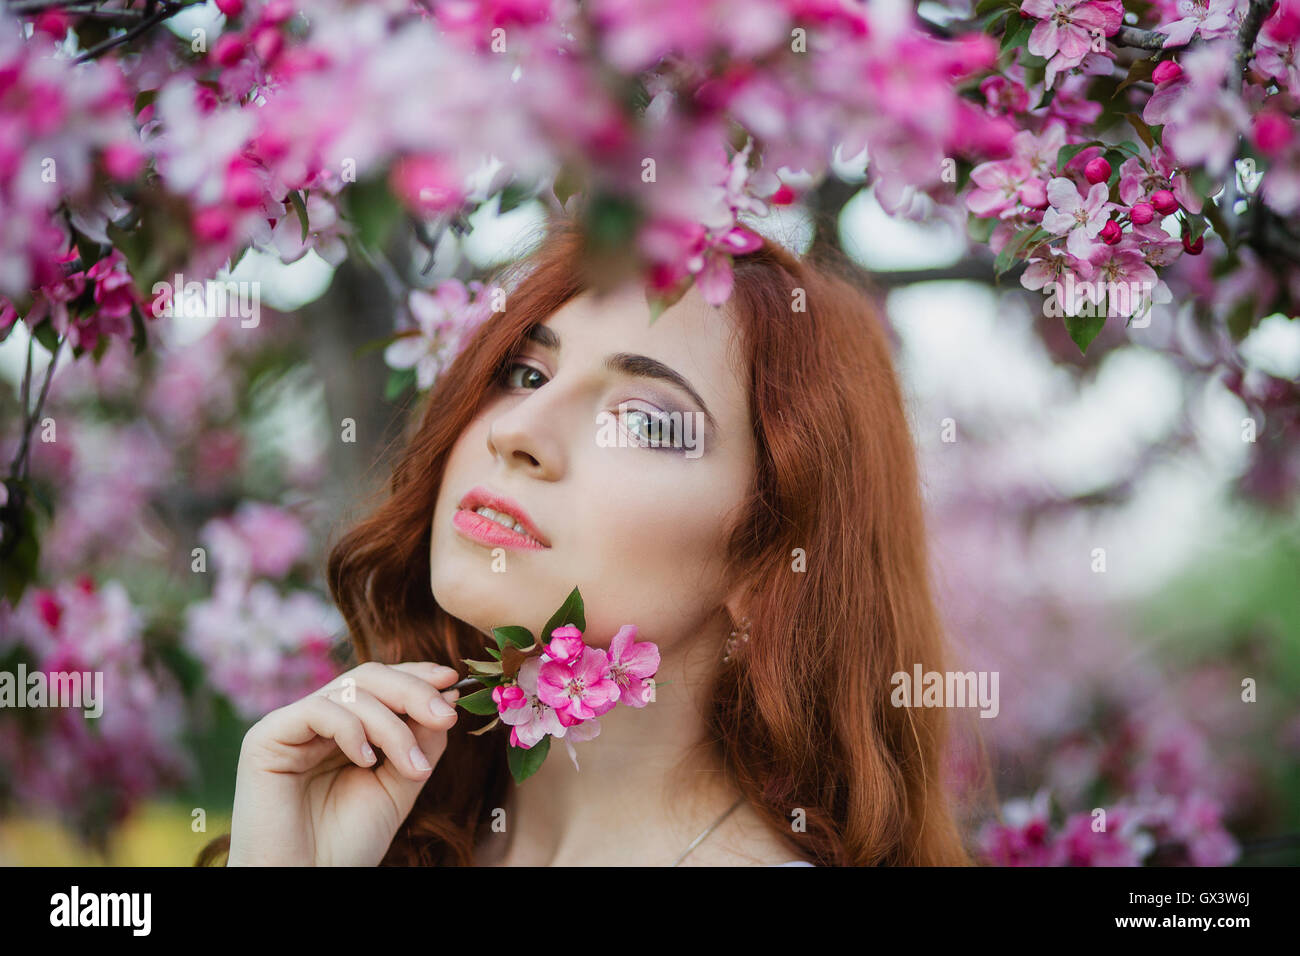 Closeup portrait of beautiful female hold blossom branch  in fresh pink floral garden, warm sunset light, spring nature, vacation and leisure concept Stock Photo